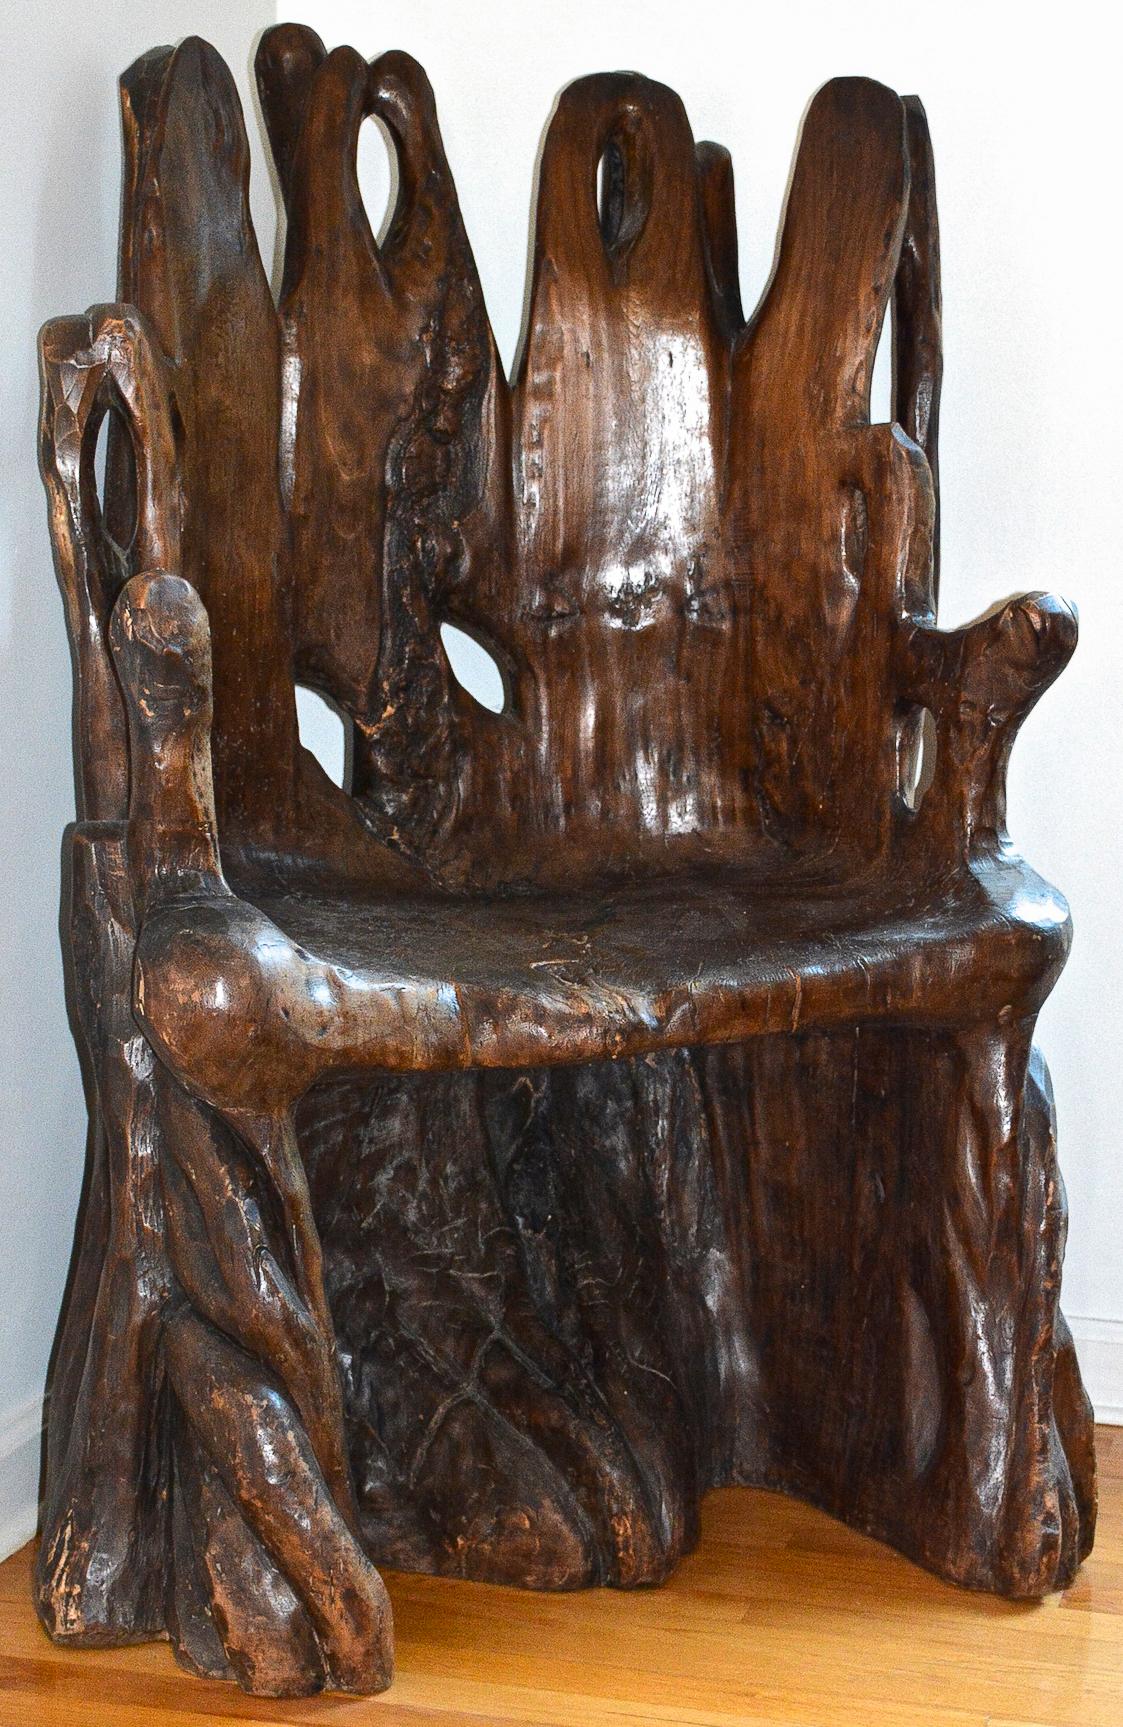 Late 19th century North Mexico banyan tree root chair.

A wondrous late 19th century naturally formed, one-of-a-kind hand-carved Banyan Tree Burl Chair with organic open work back from Northern Mexico.

This chair with its all natural intricate